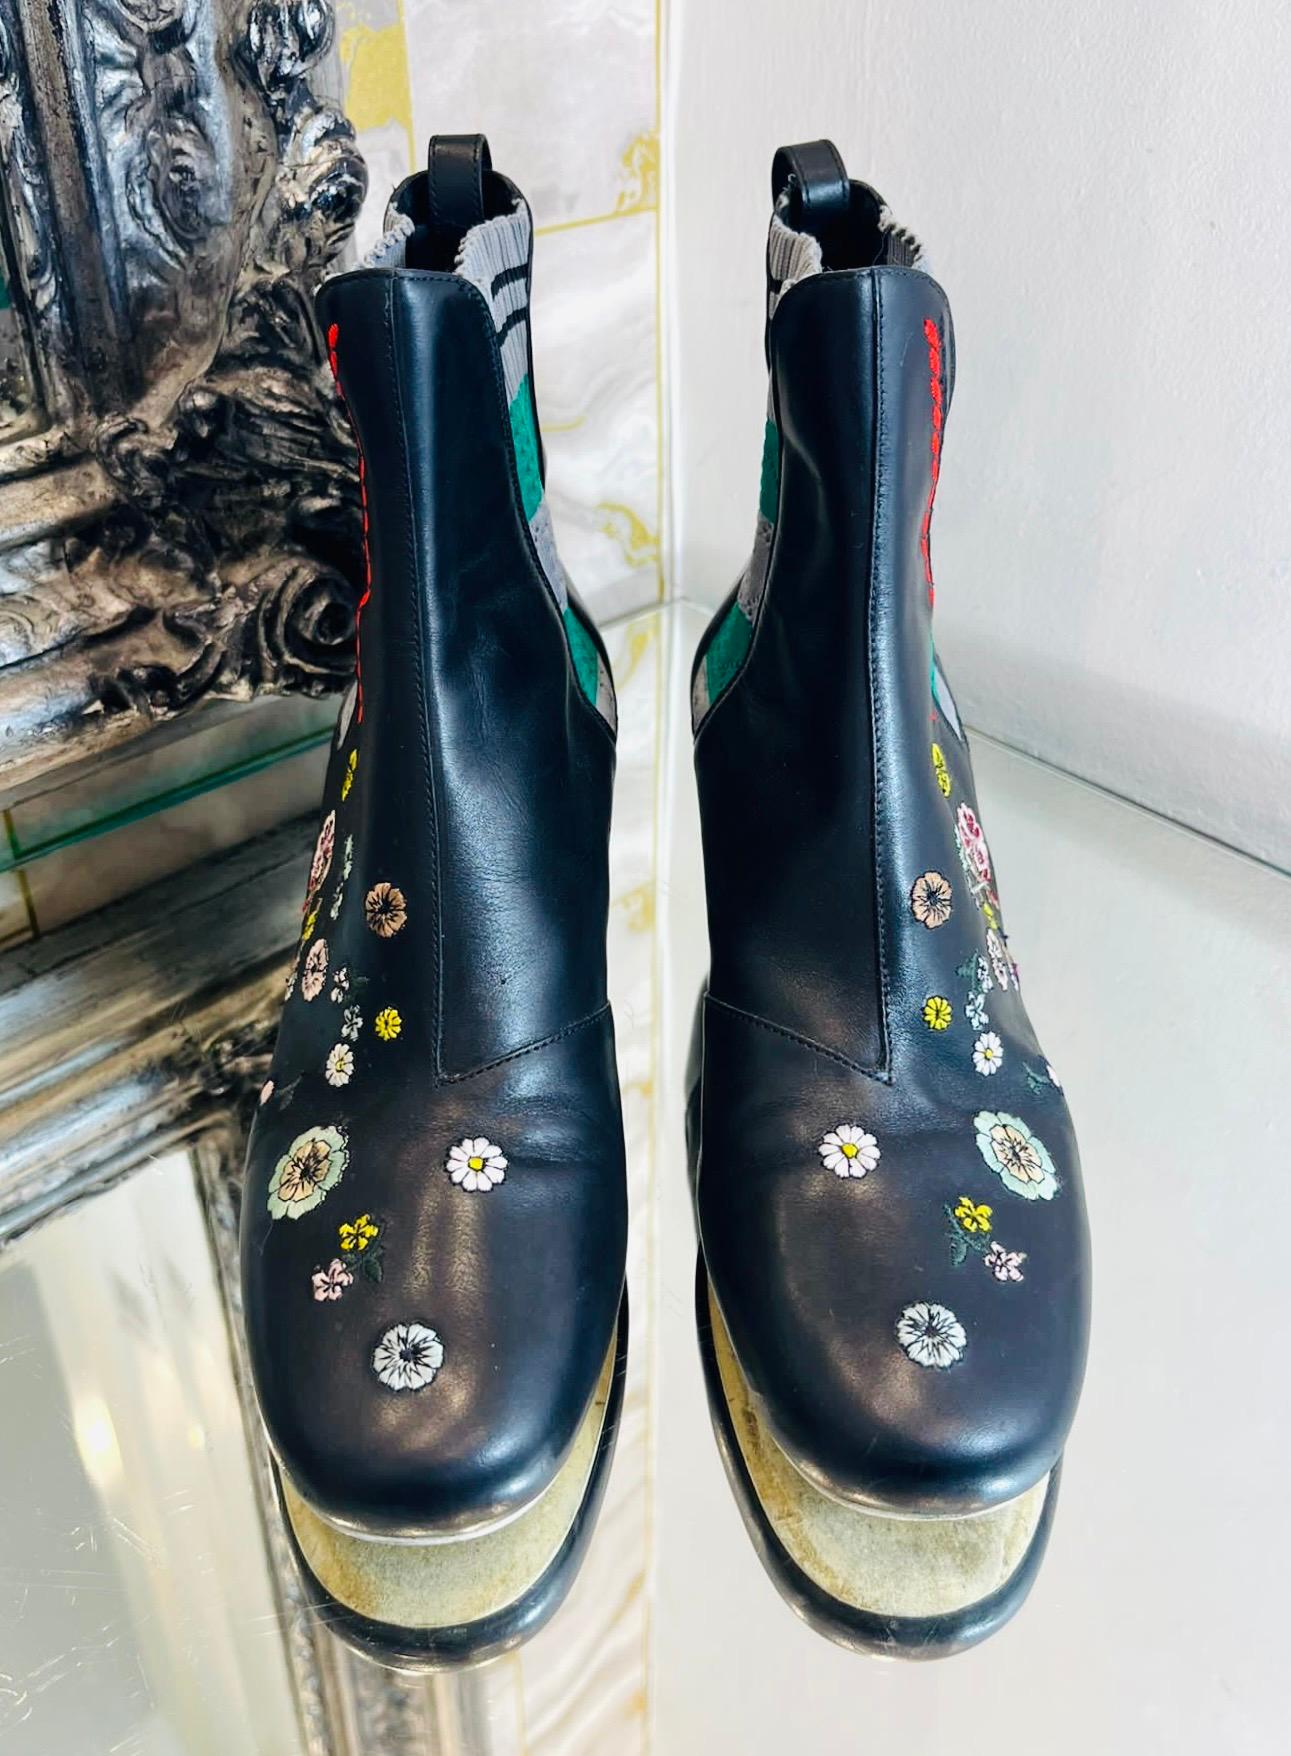 Fendi Floral Embroidered Leather Ankle Boots

Black boots designed with multicoloured floral embroideries.

Detailed with red stitching along elasticated knit inserts to the sides embellished with flower prints.

Featuring round toe and block heel.